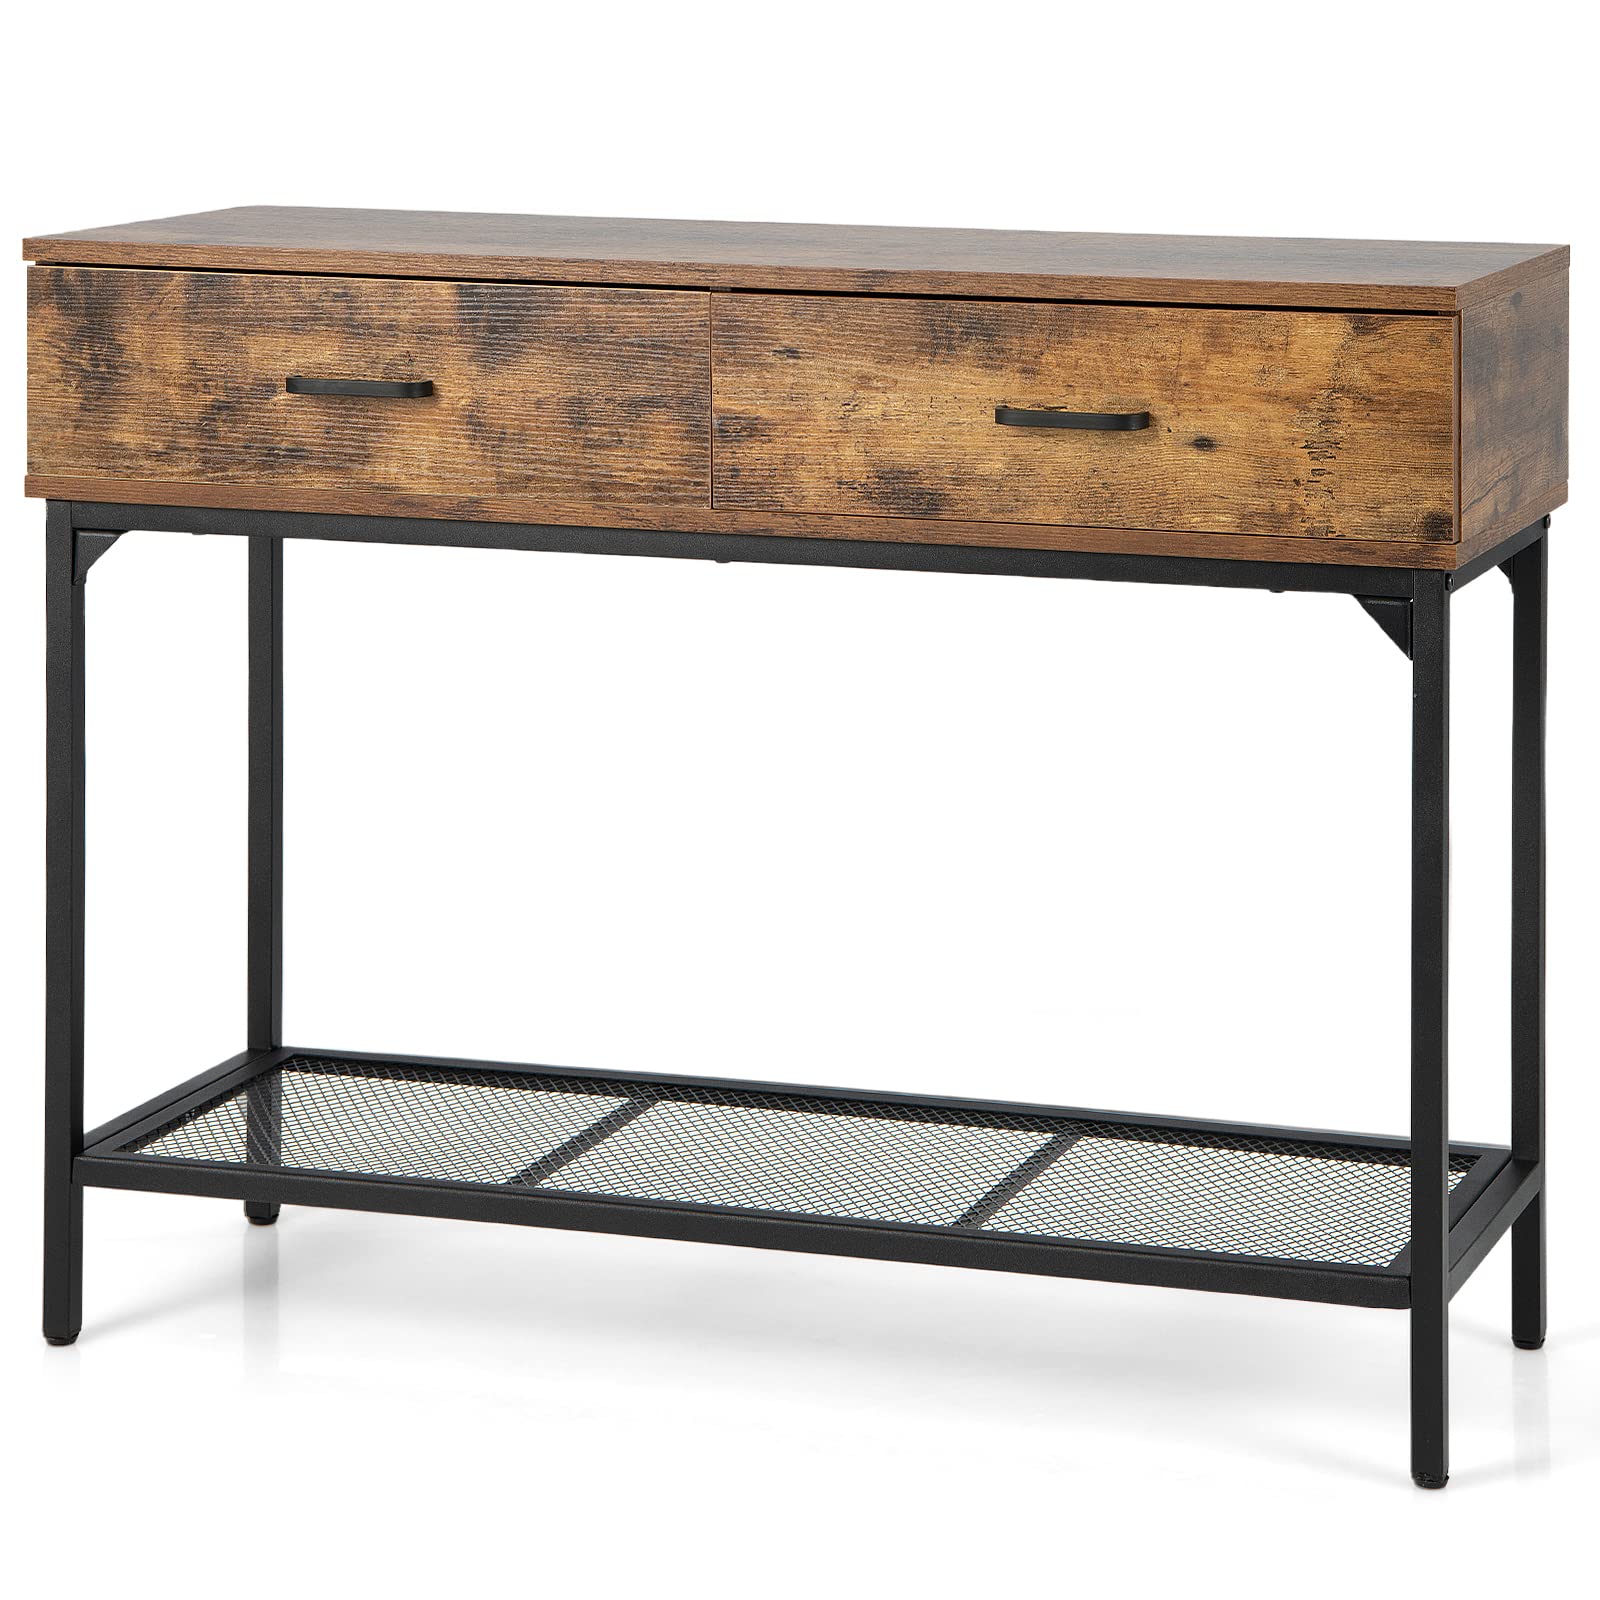 Giantex Console Table with Drawers - Industrial Hallway Table for Small Space, Long Sofa Side Table Behind Couch